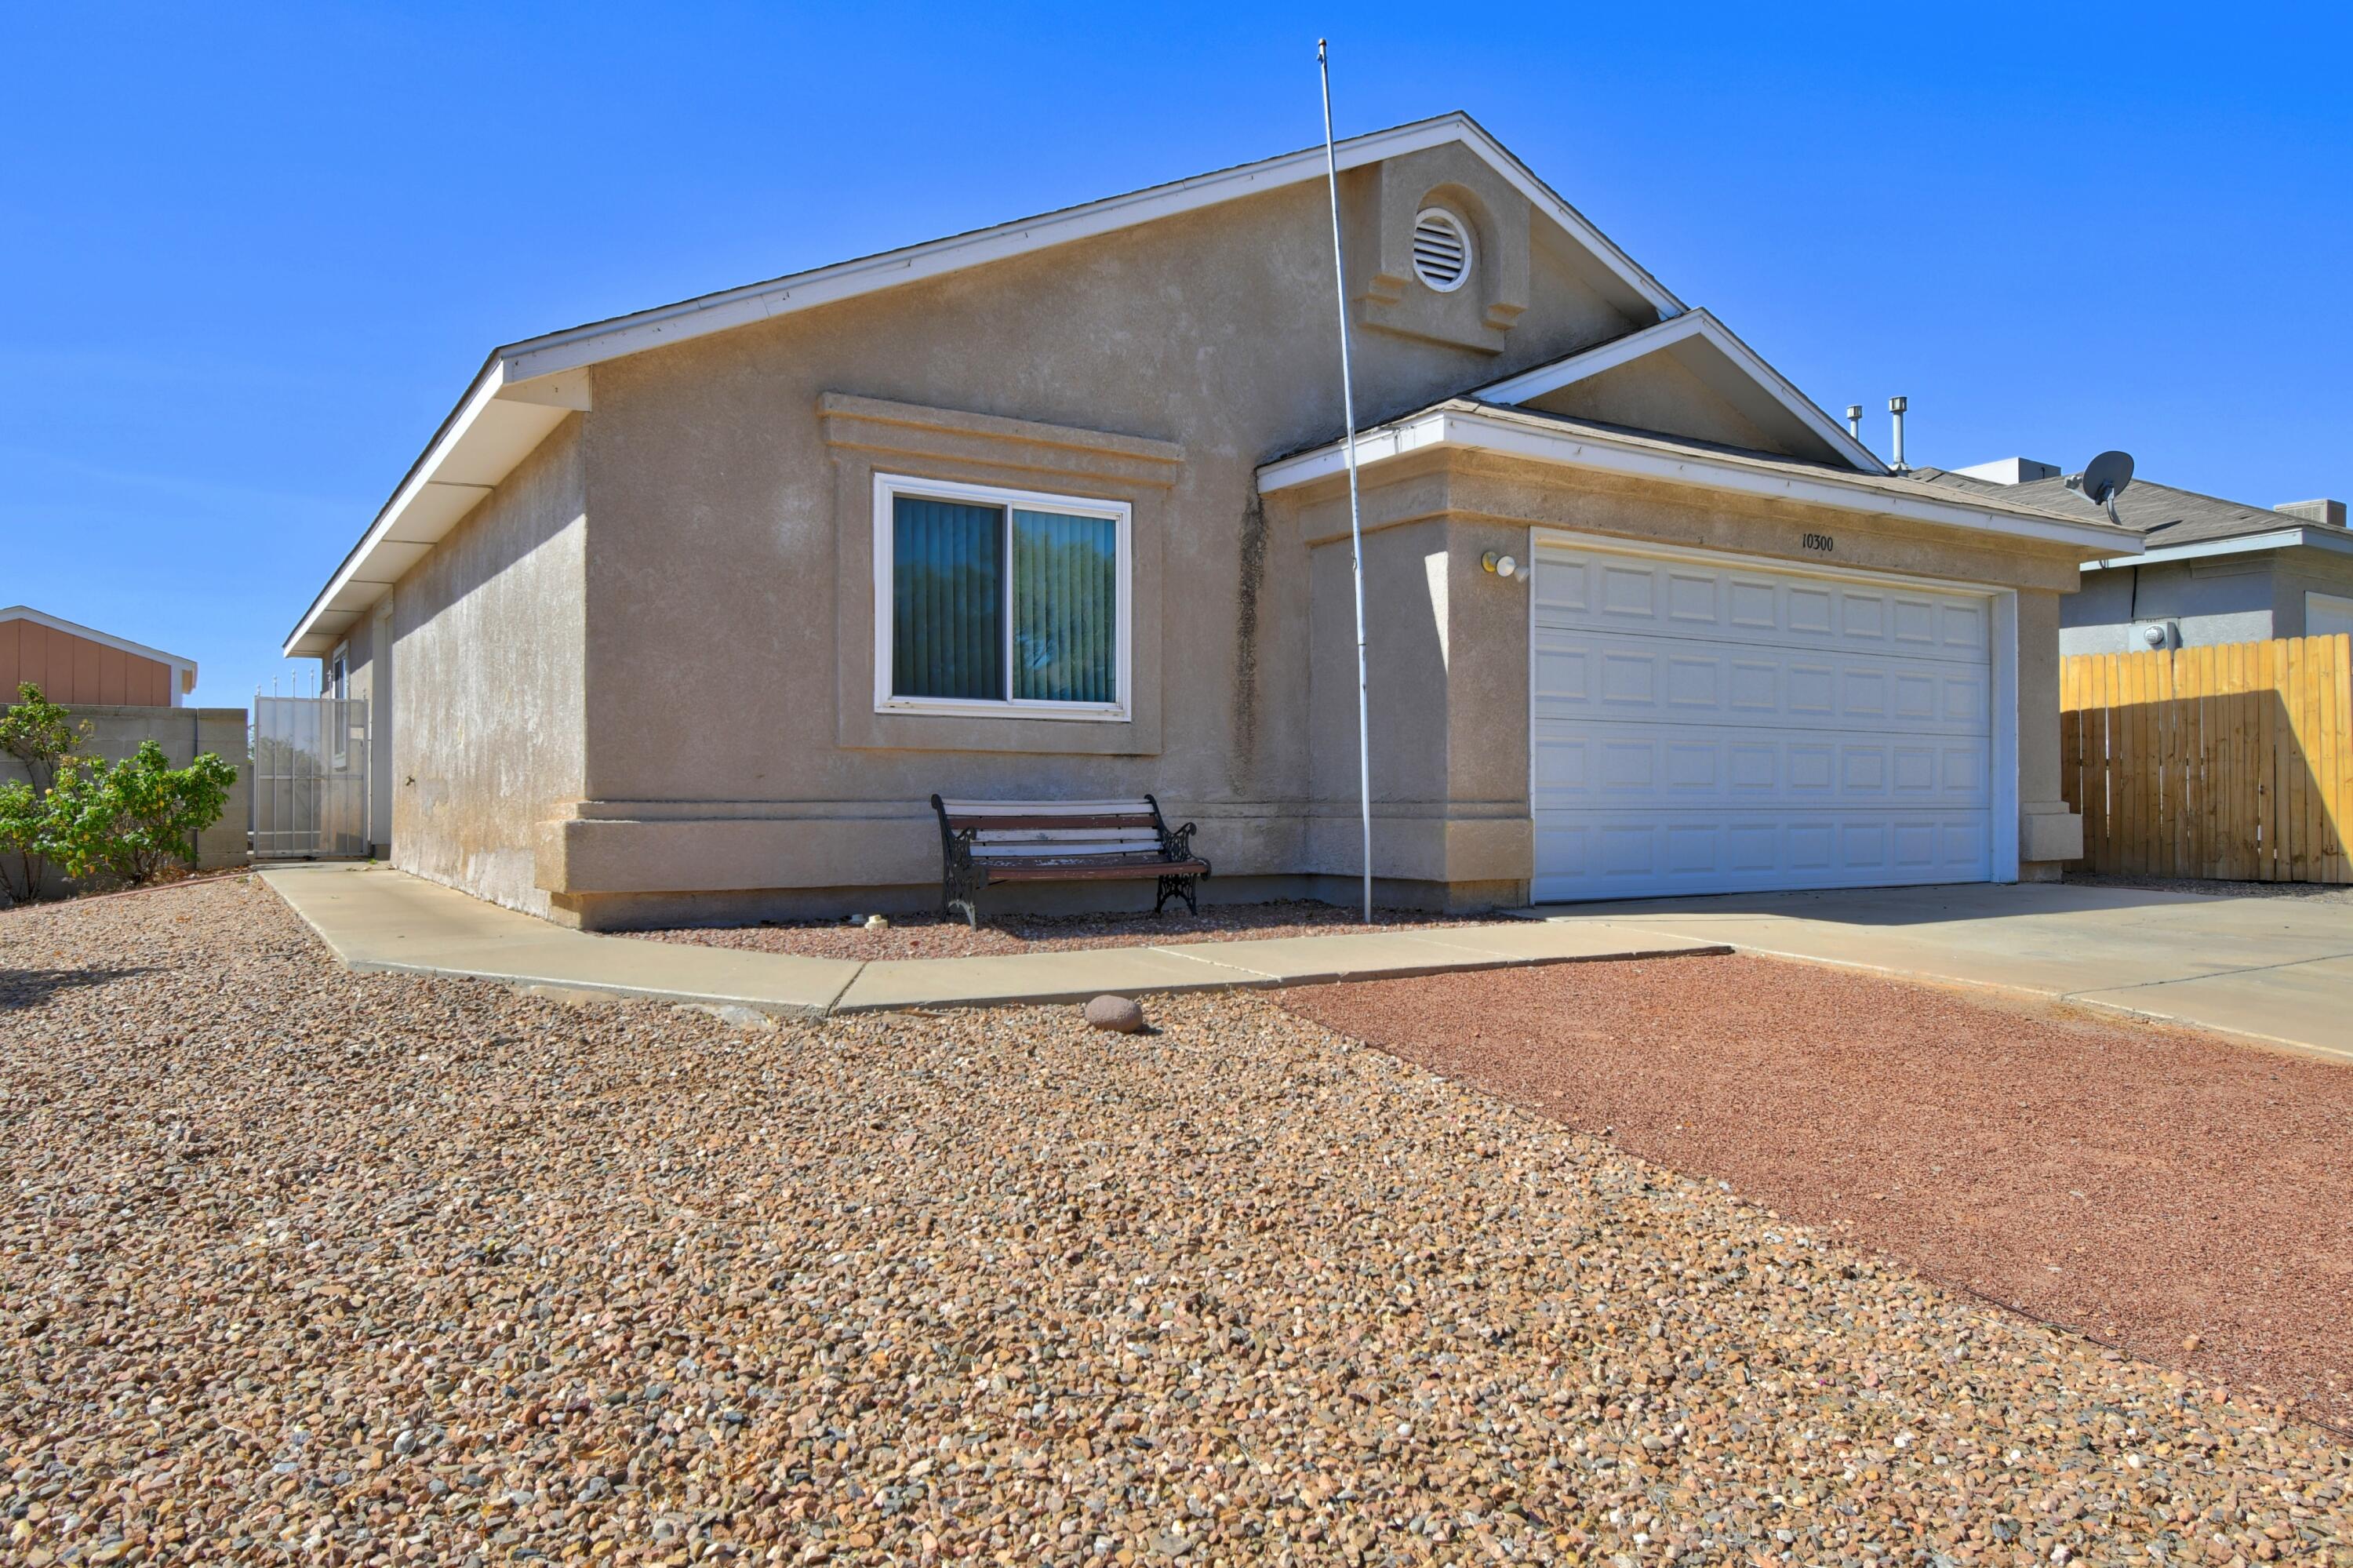 Fantastic 3 bedroom, 2 bath home in the SW side of Albuquerque. This home has a great floor plan along with NEW paint and NEW carpet! Enjoy the covered patio off the eat in kitchen and stay cool this summer with refrigerated air.  Nice size yard with a tuff shed for extra storage.  Well established neighborhood close to schools, shopping and I-40.